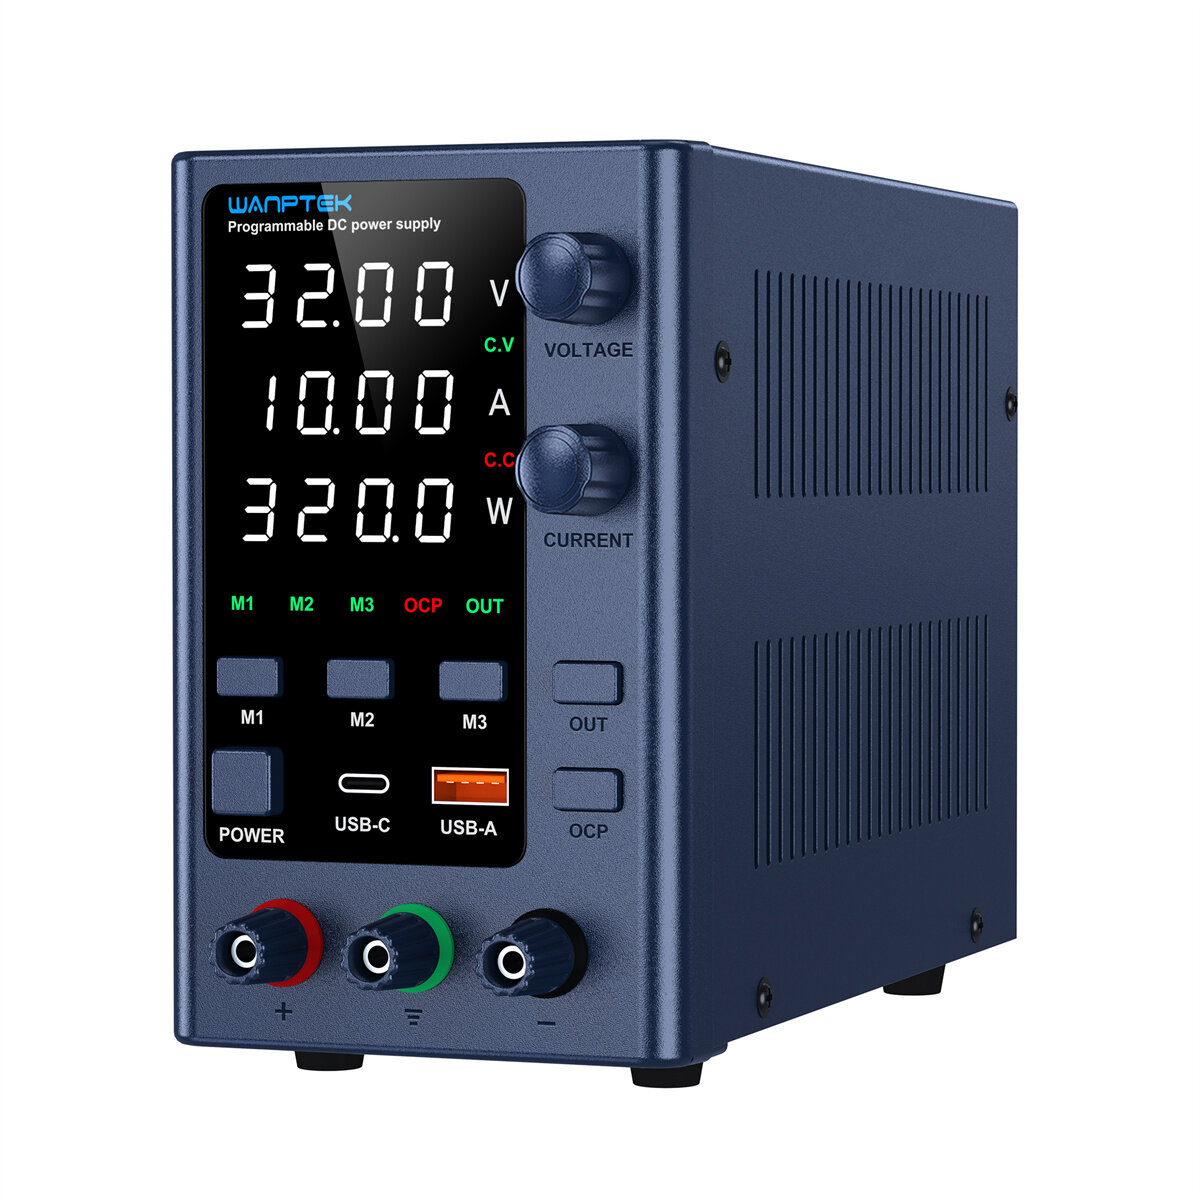 Image of WANPTEK Regulated Power Supply with 0-160V Voltage 0-10A Current Multi-Function Protection Superior Stability Digital Di